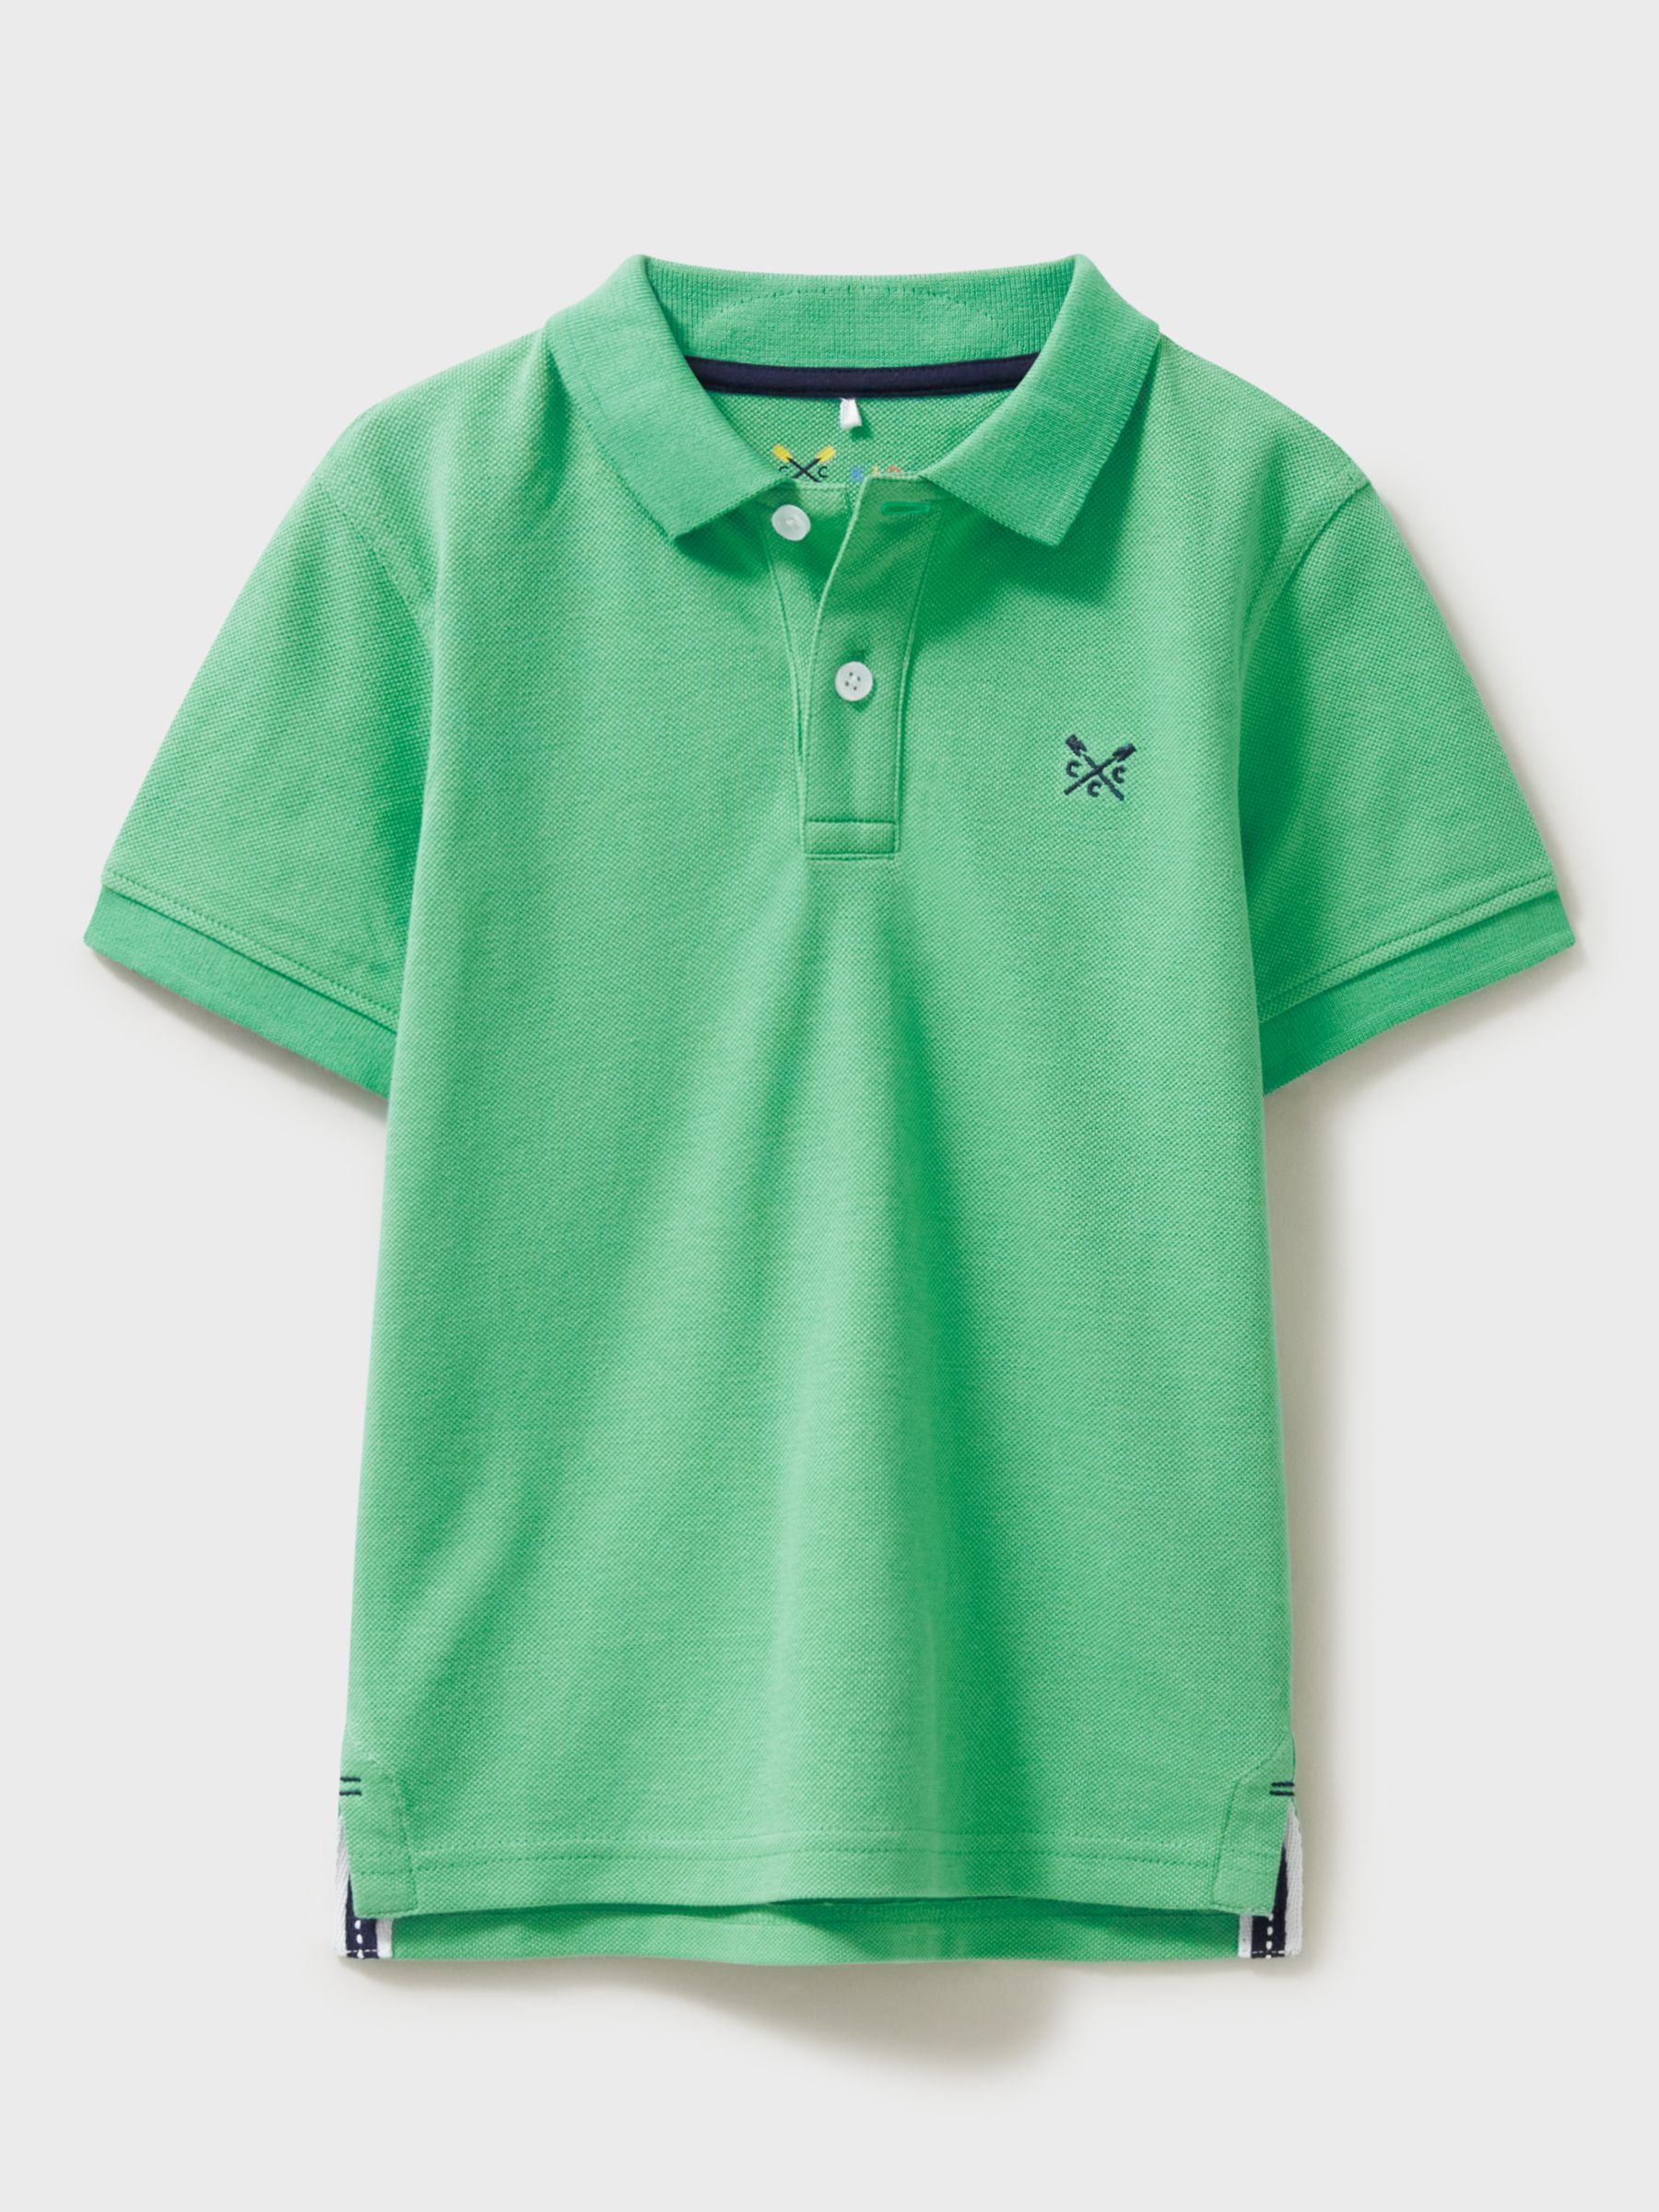 Crew Clothing Kids' Classic Pique Polo Shirt, Mid Green, 6-7 years